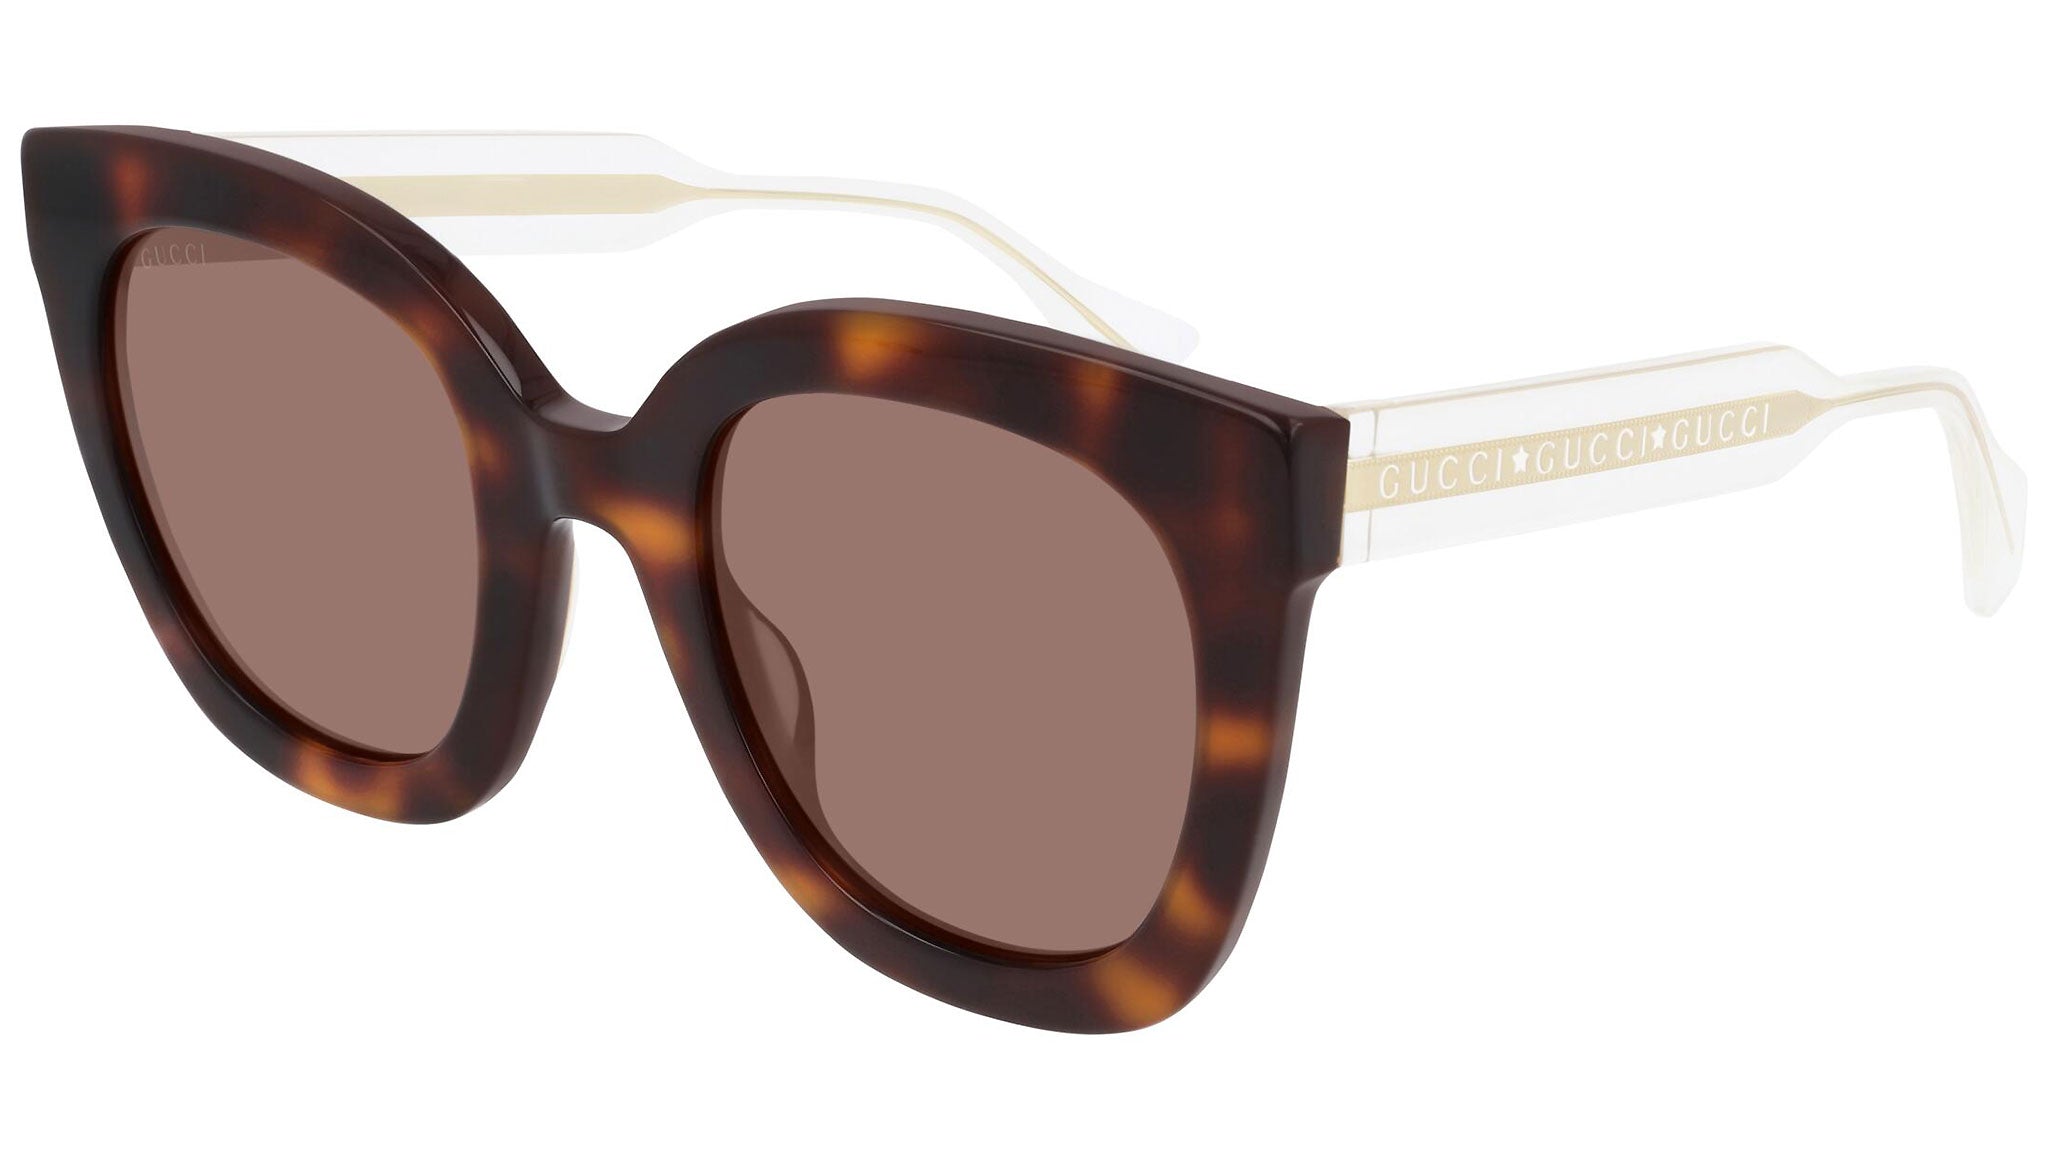 GG0564S shiny tortoise and brown